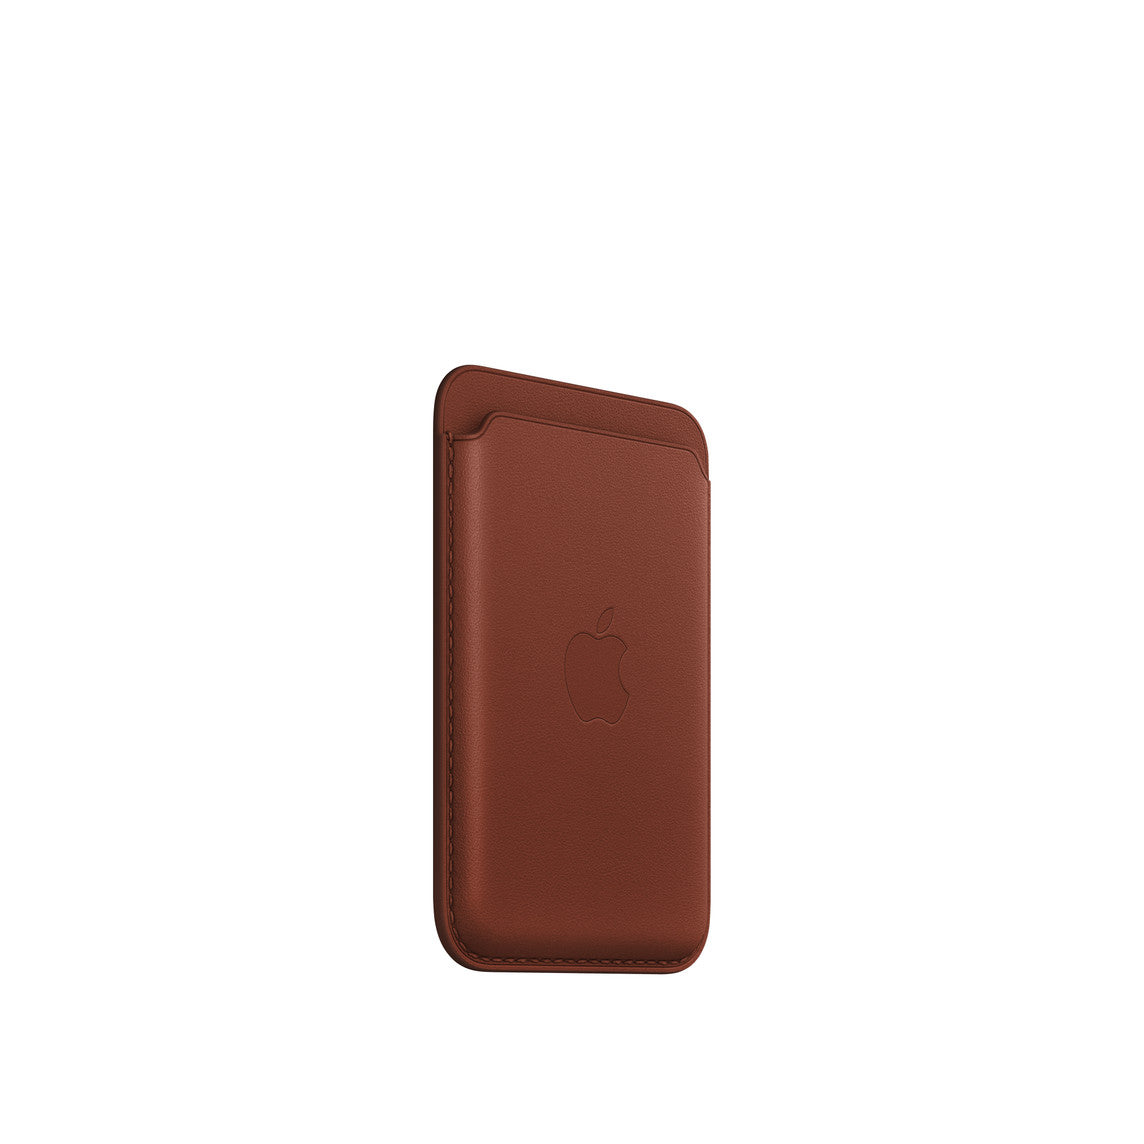 iPhone Leather Wallet